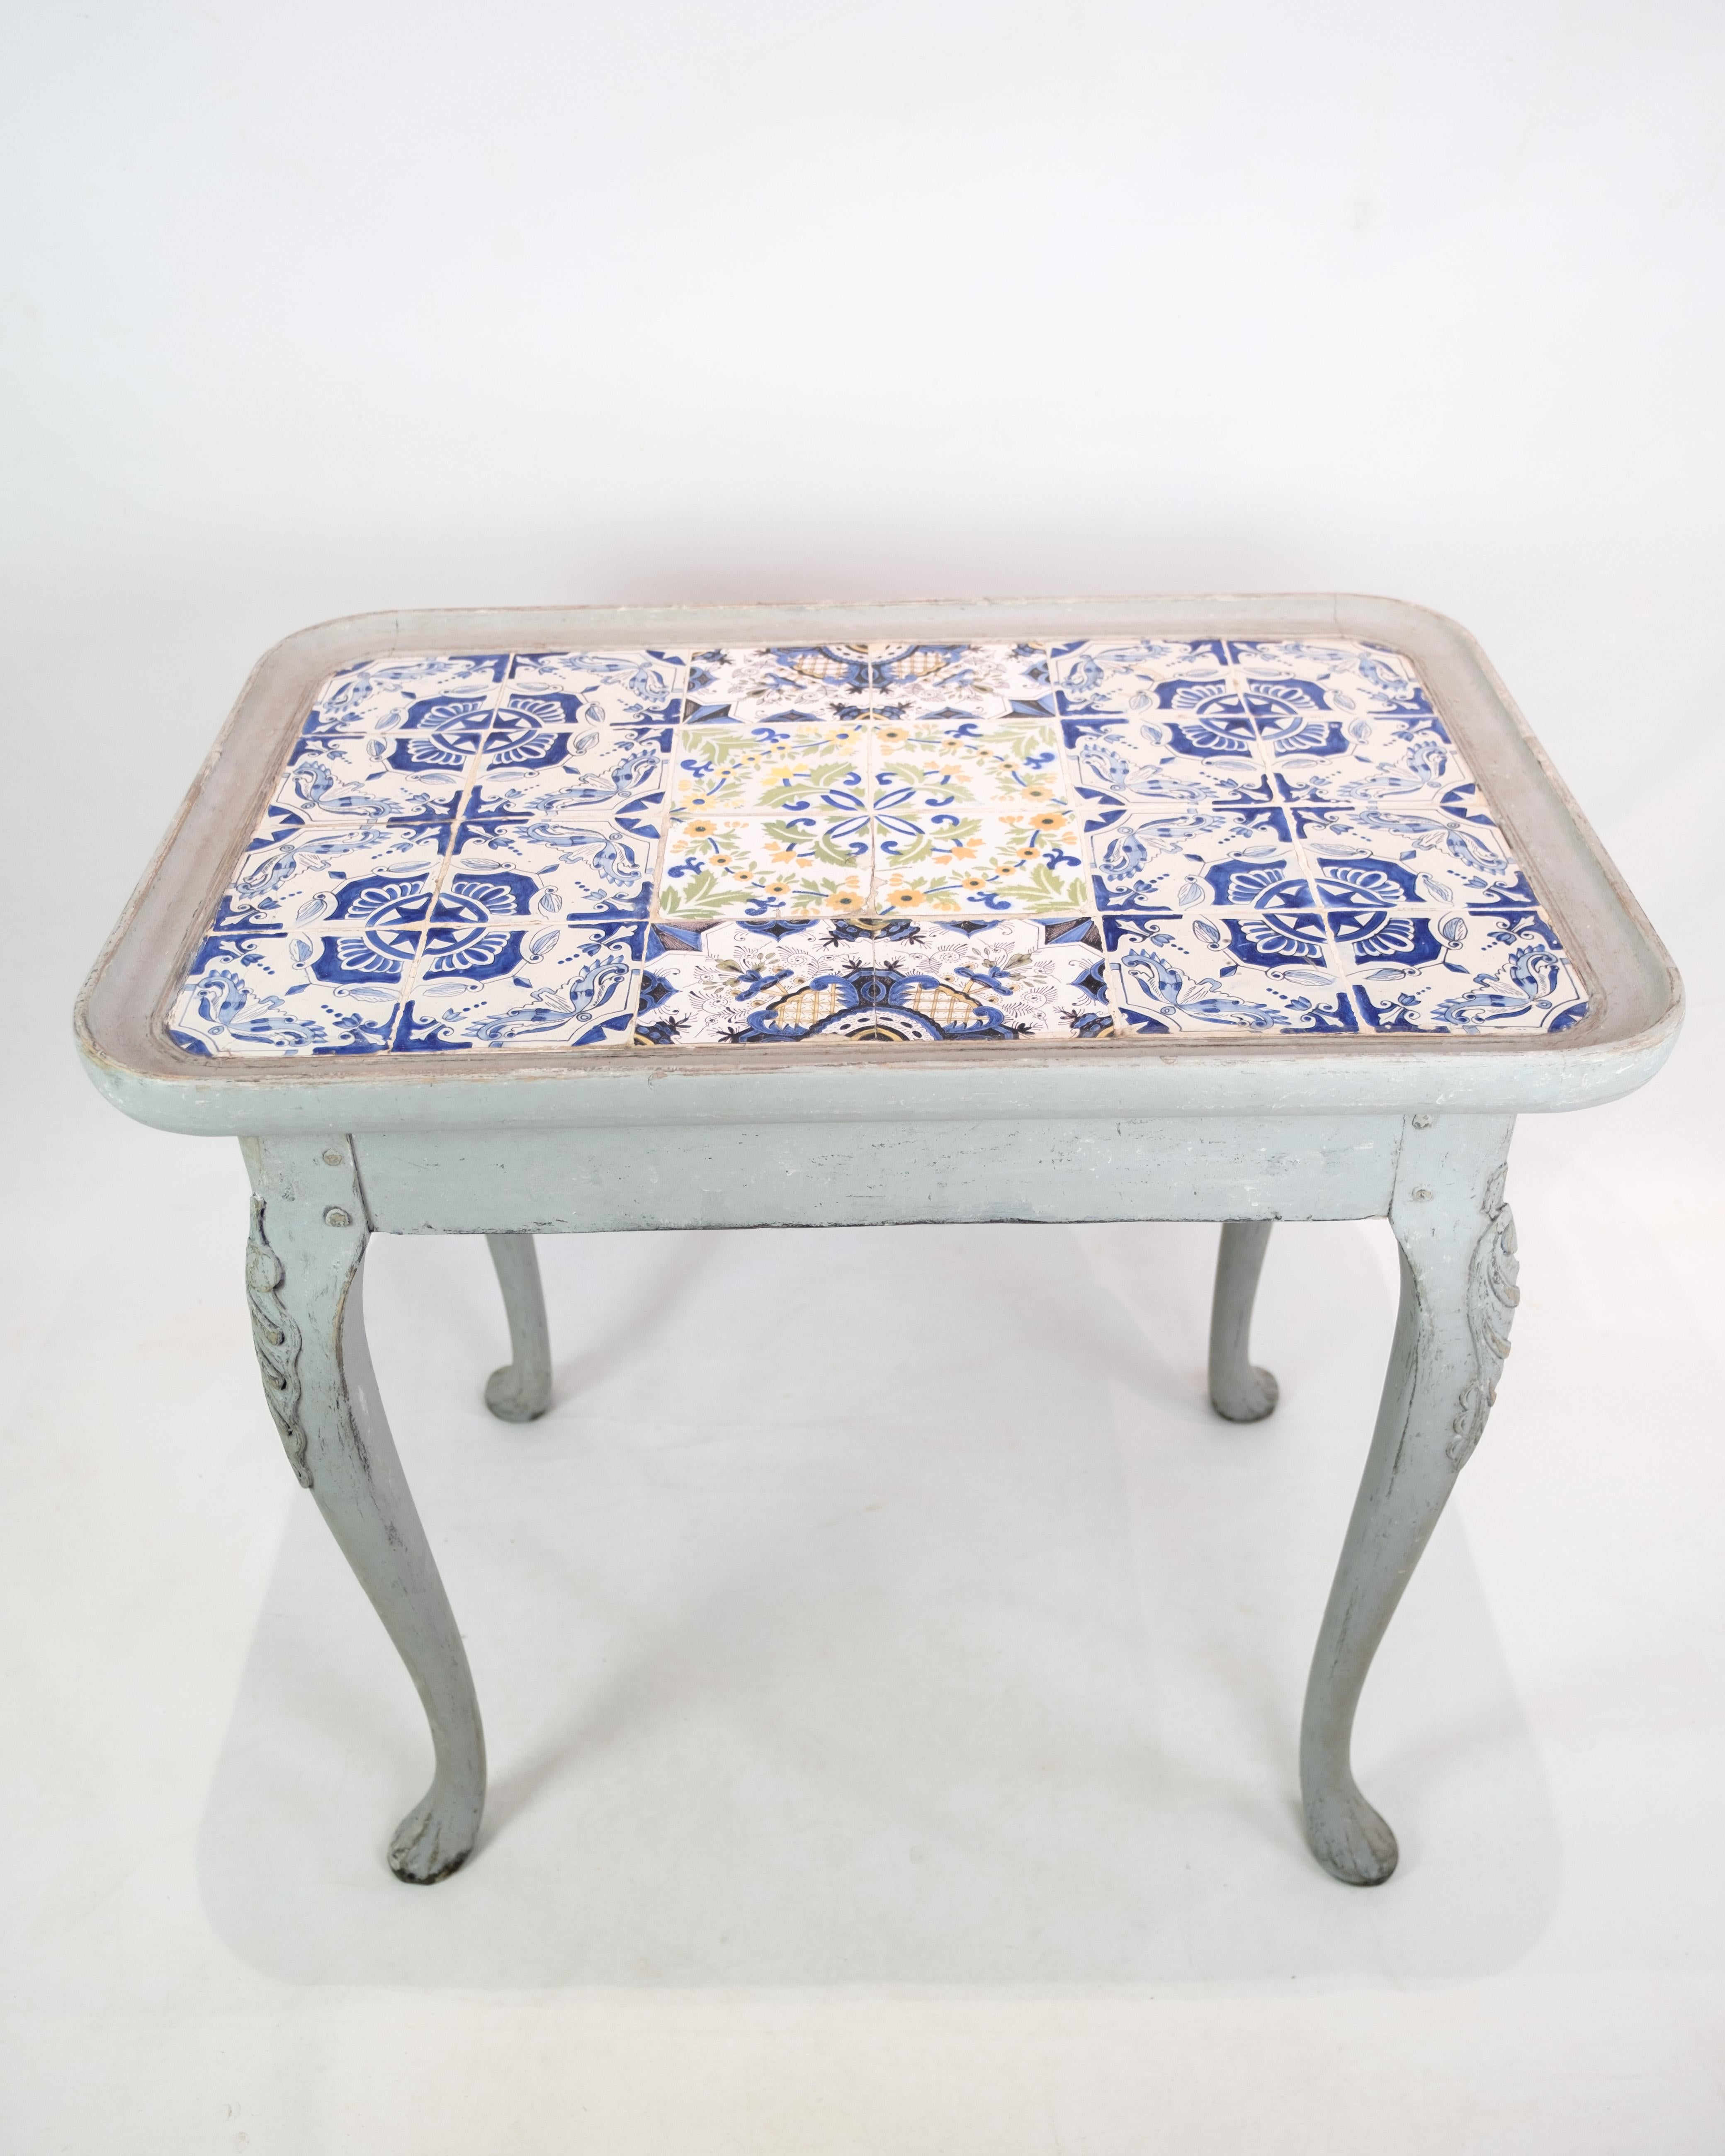 Wood The Rococo Tile Table Painted in Grey From 1780s For Sale